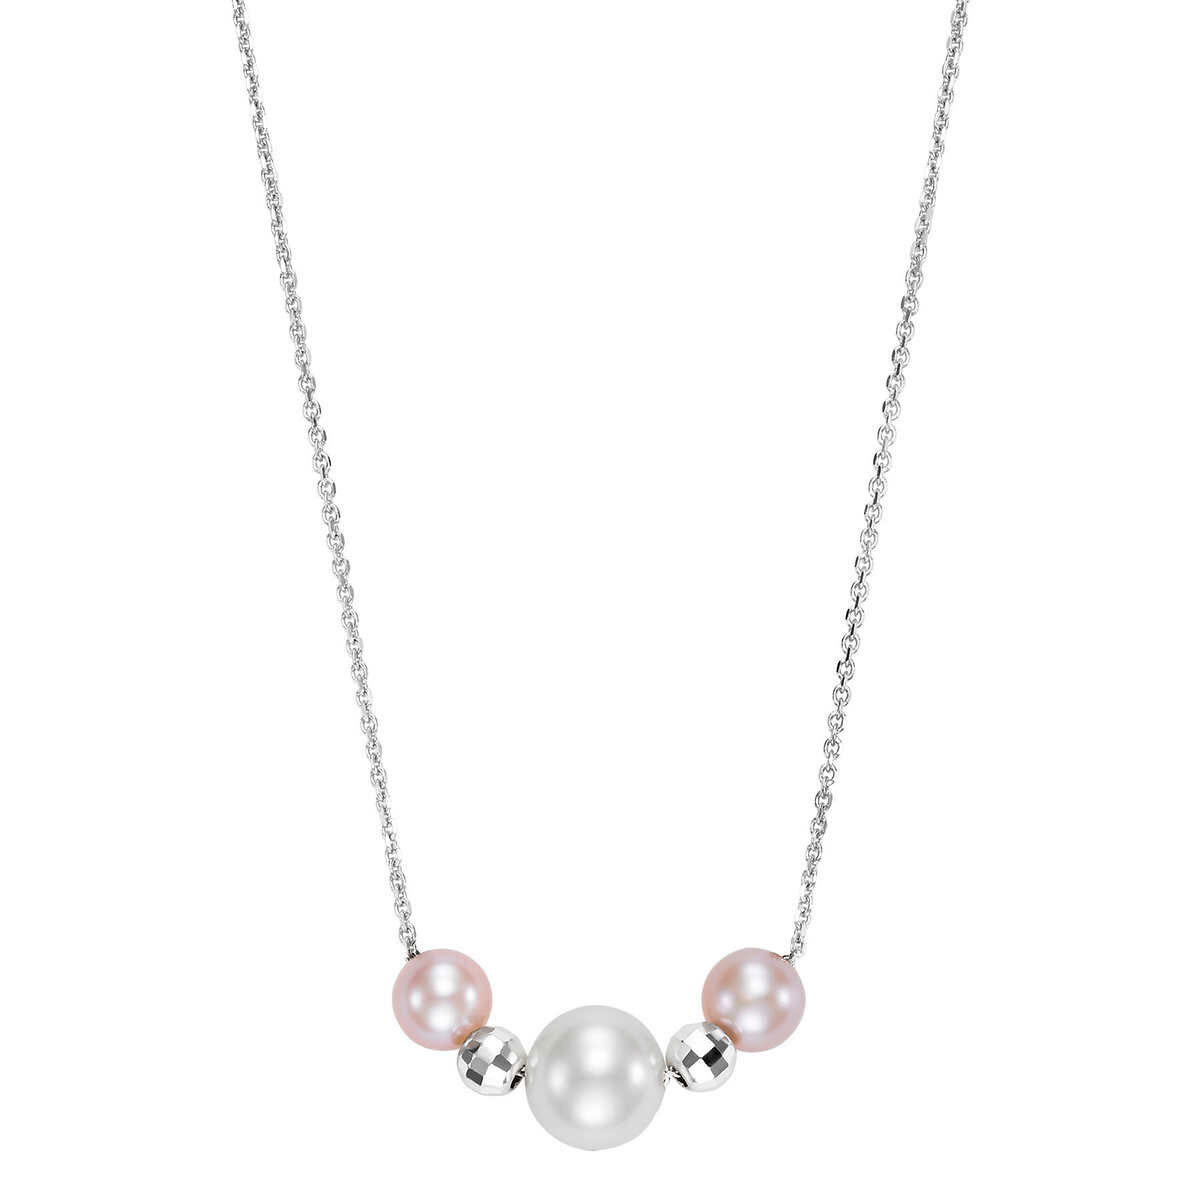 5.5-6mm White & 8-8.5mm Pink Cultured Freshwater Pearl Necklace, 14ct White Gold